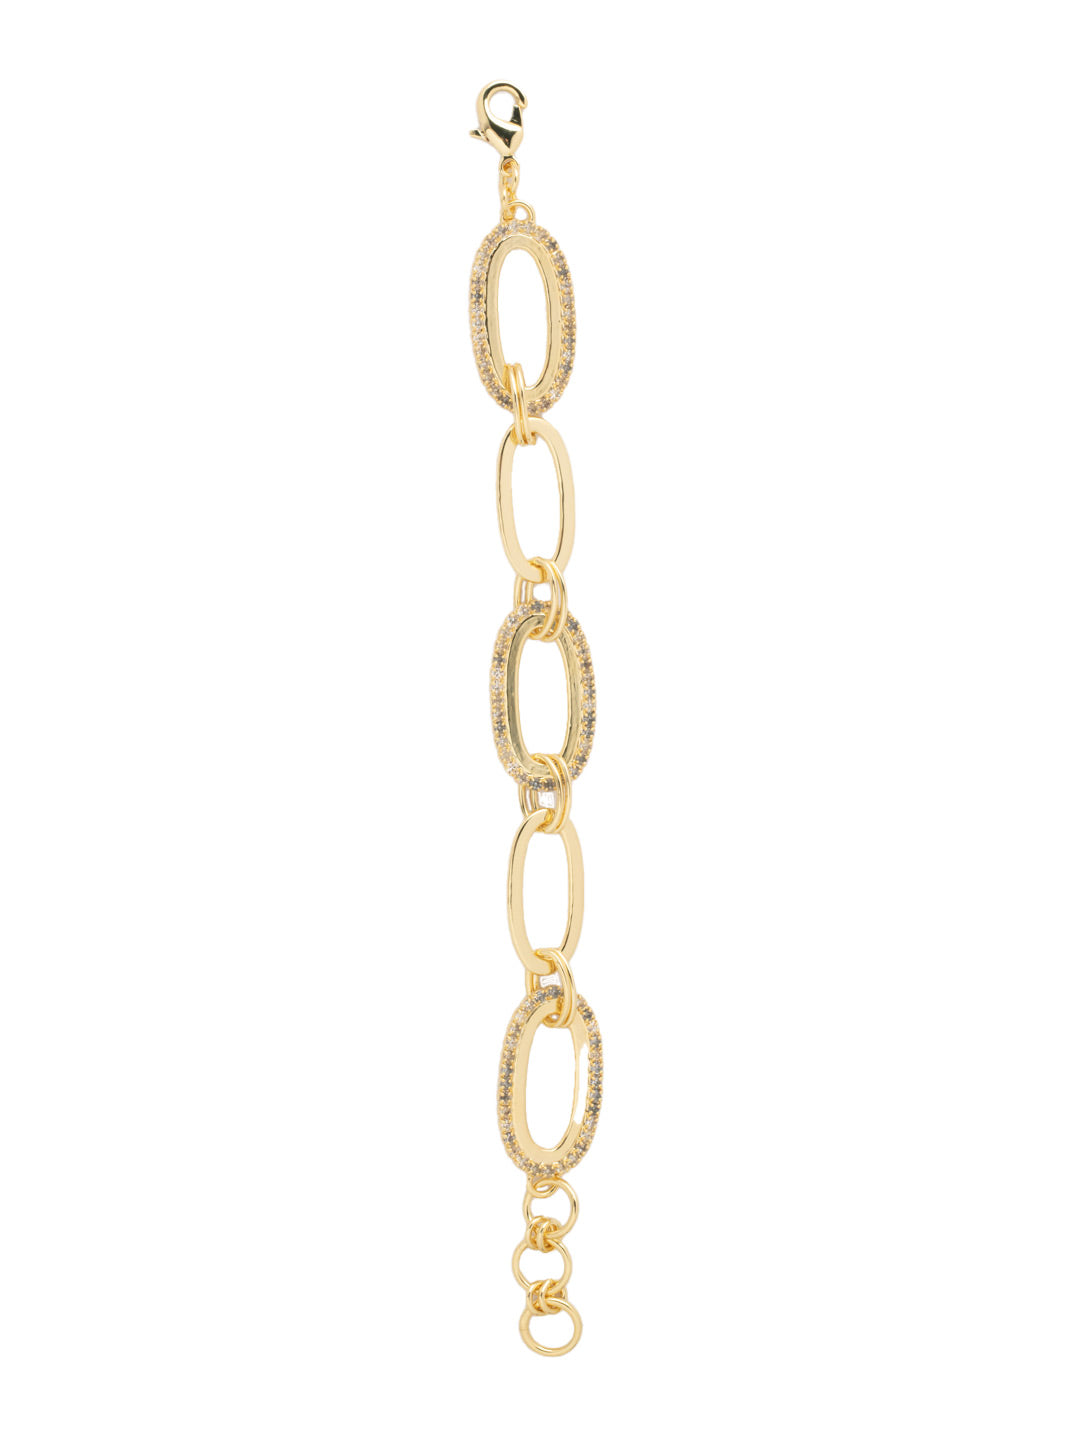 Tori Tennis Bracelet - BFL4BGCRY - <p>The Tori Tennis Bracelet features alternating rhinestone and metal chain links on an adjustable chain secured with a lobster claw clasp. From Sorrelli's Crystal collection in our Bright Gold-tone finish.</p>